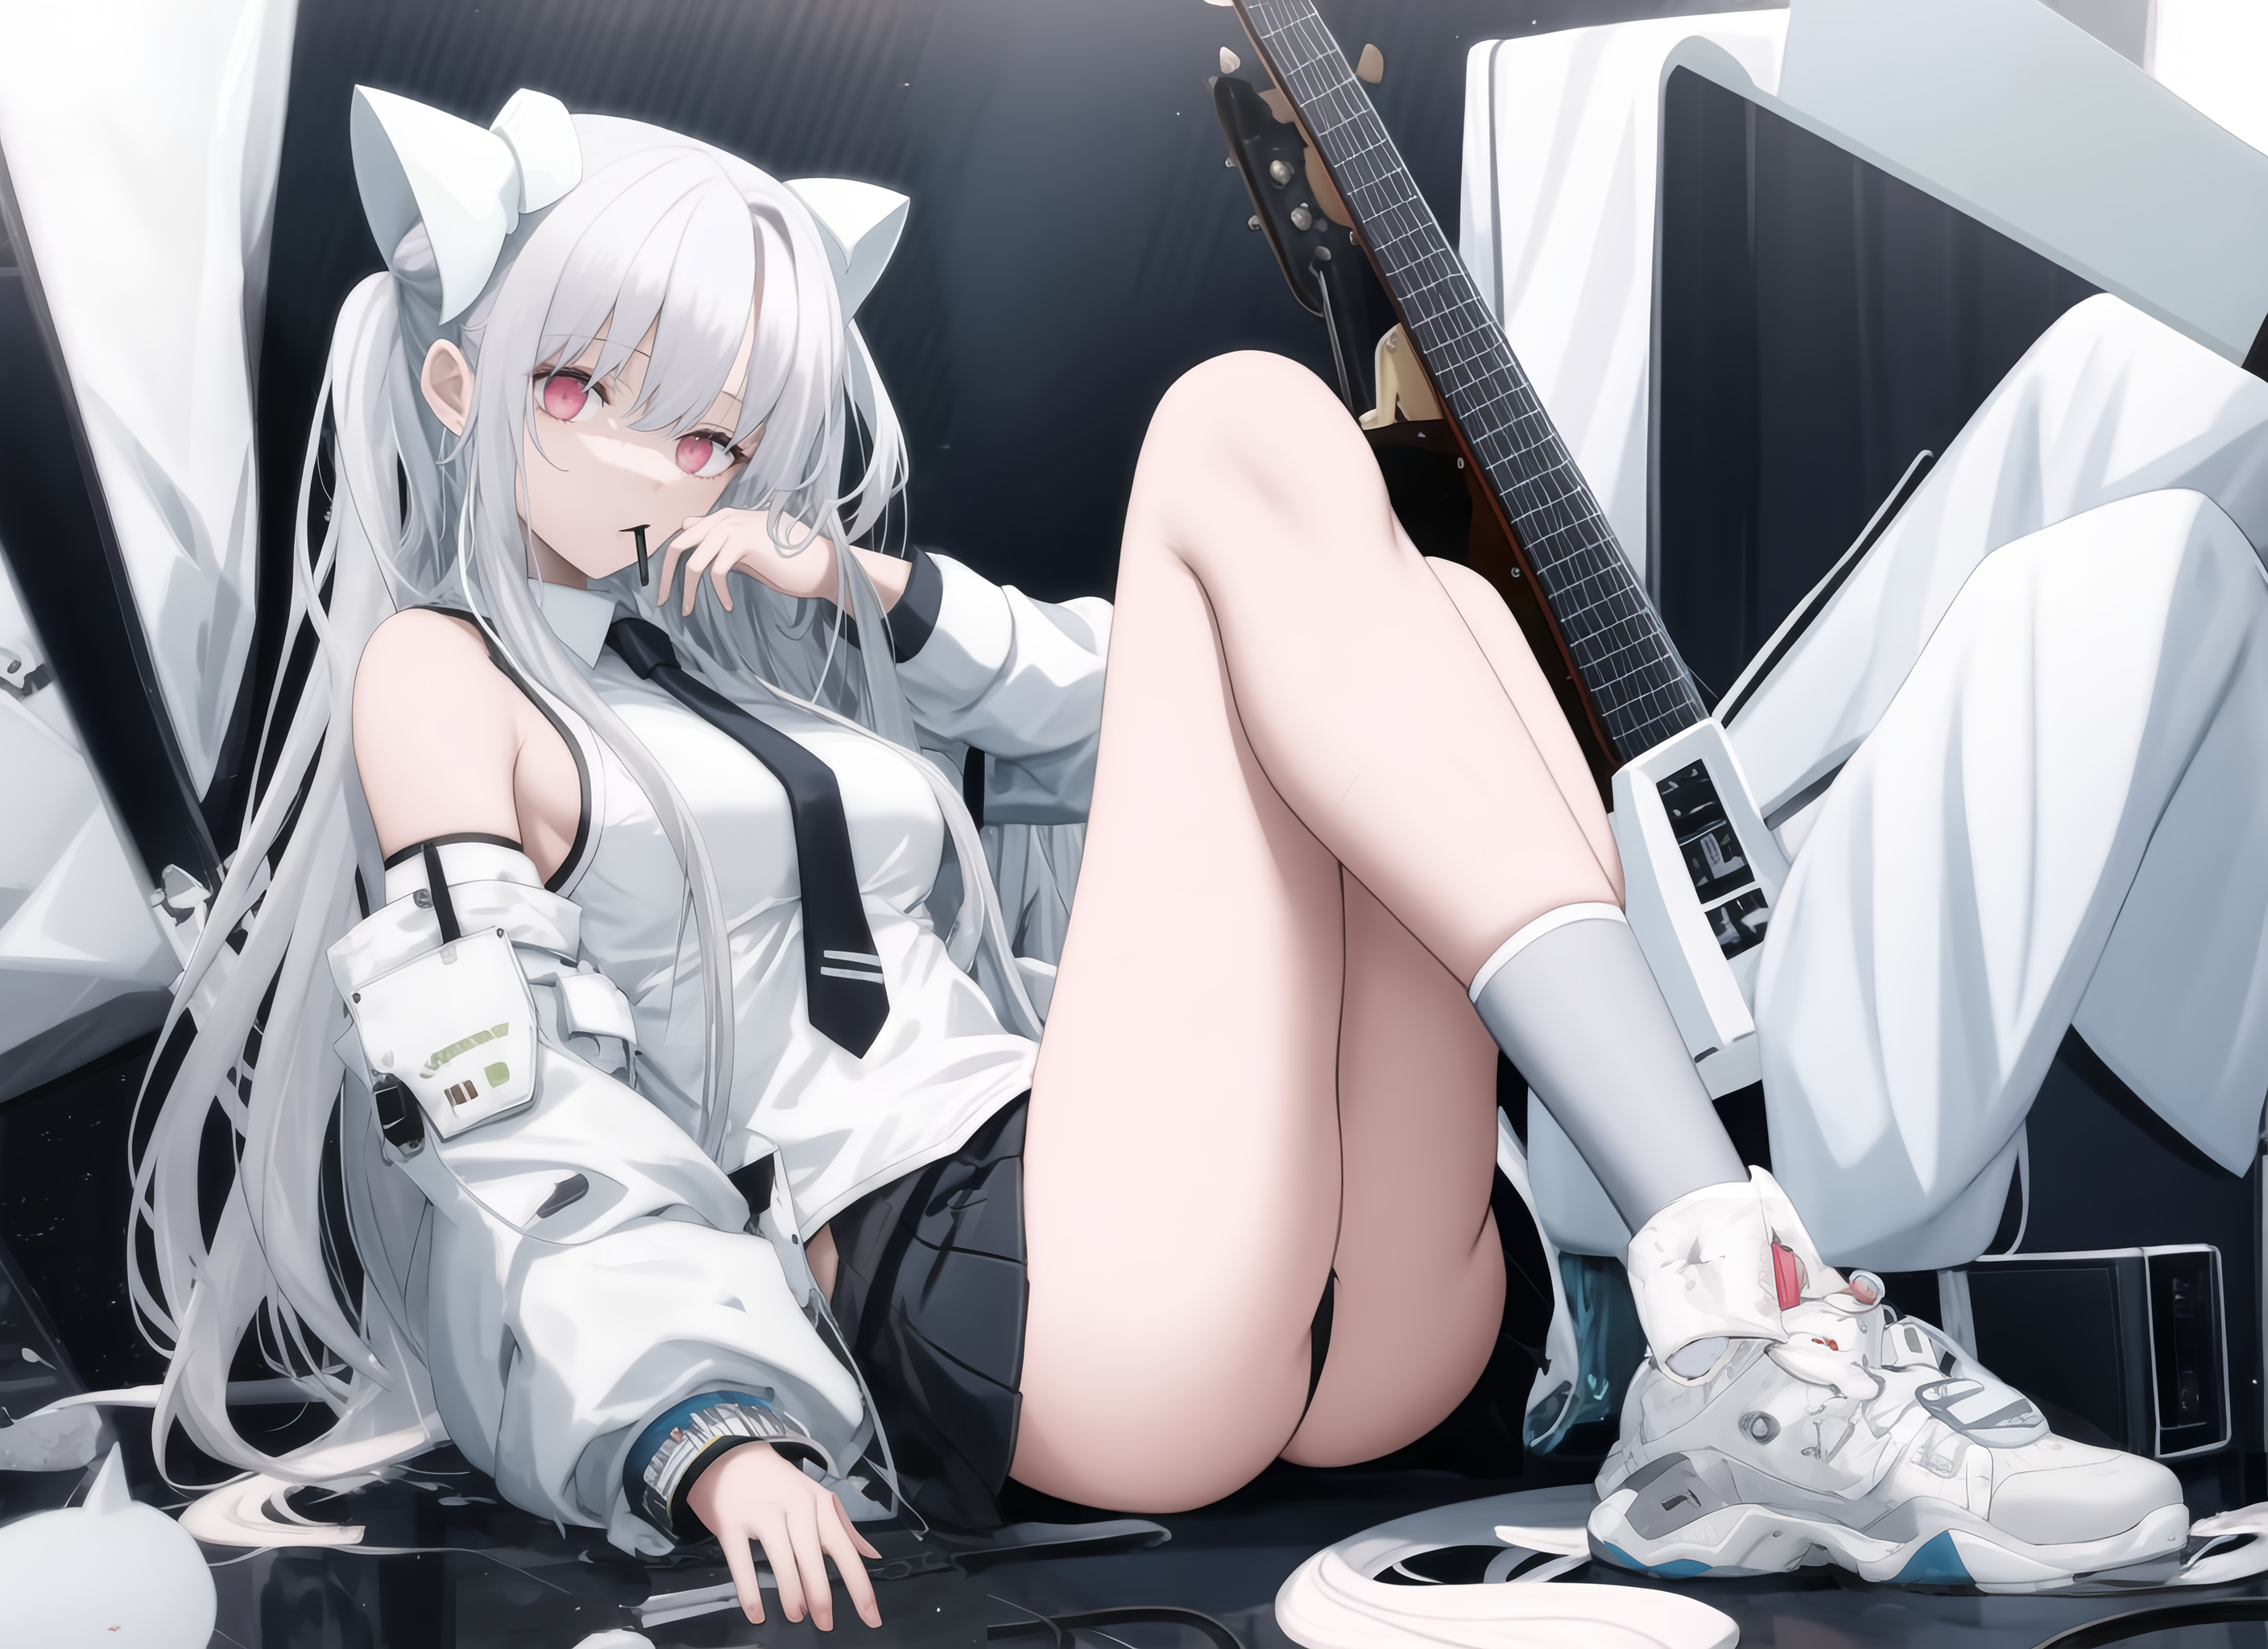 anime girl with white hair and cat ears